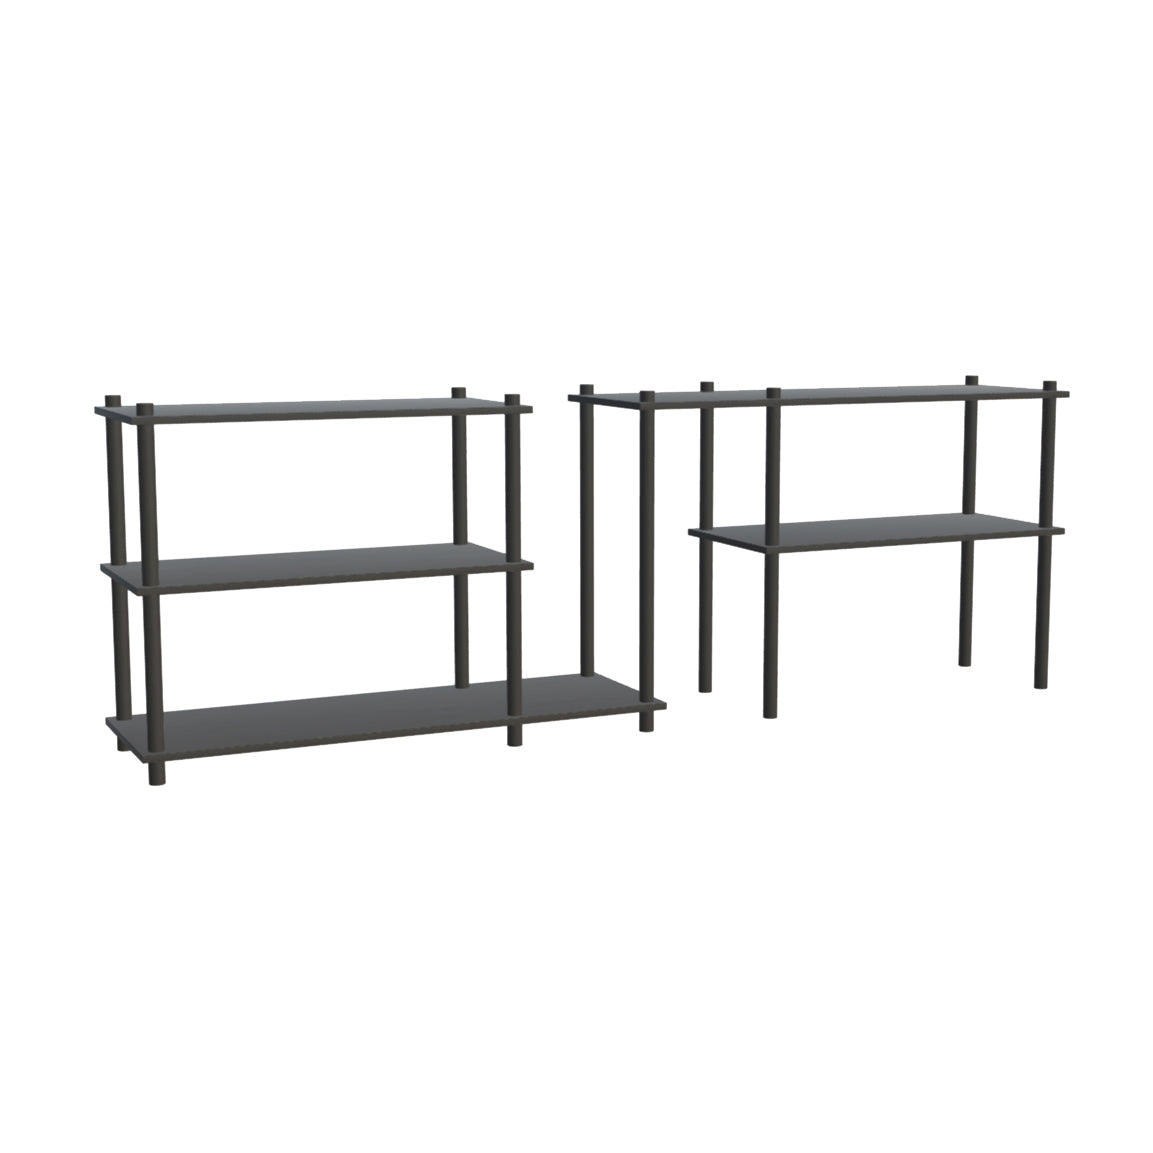 Elevate Shelving - System 10 by Woud